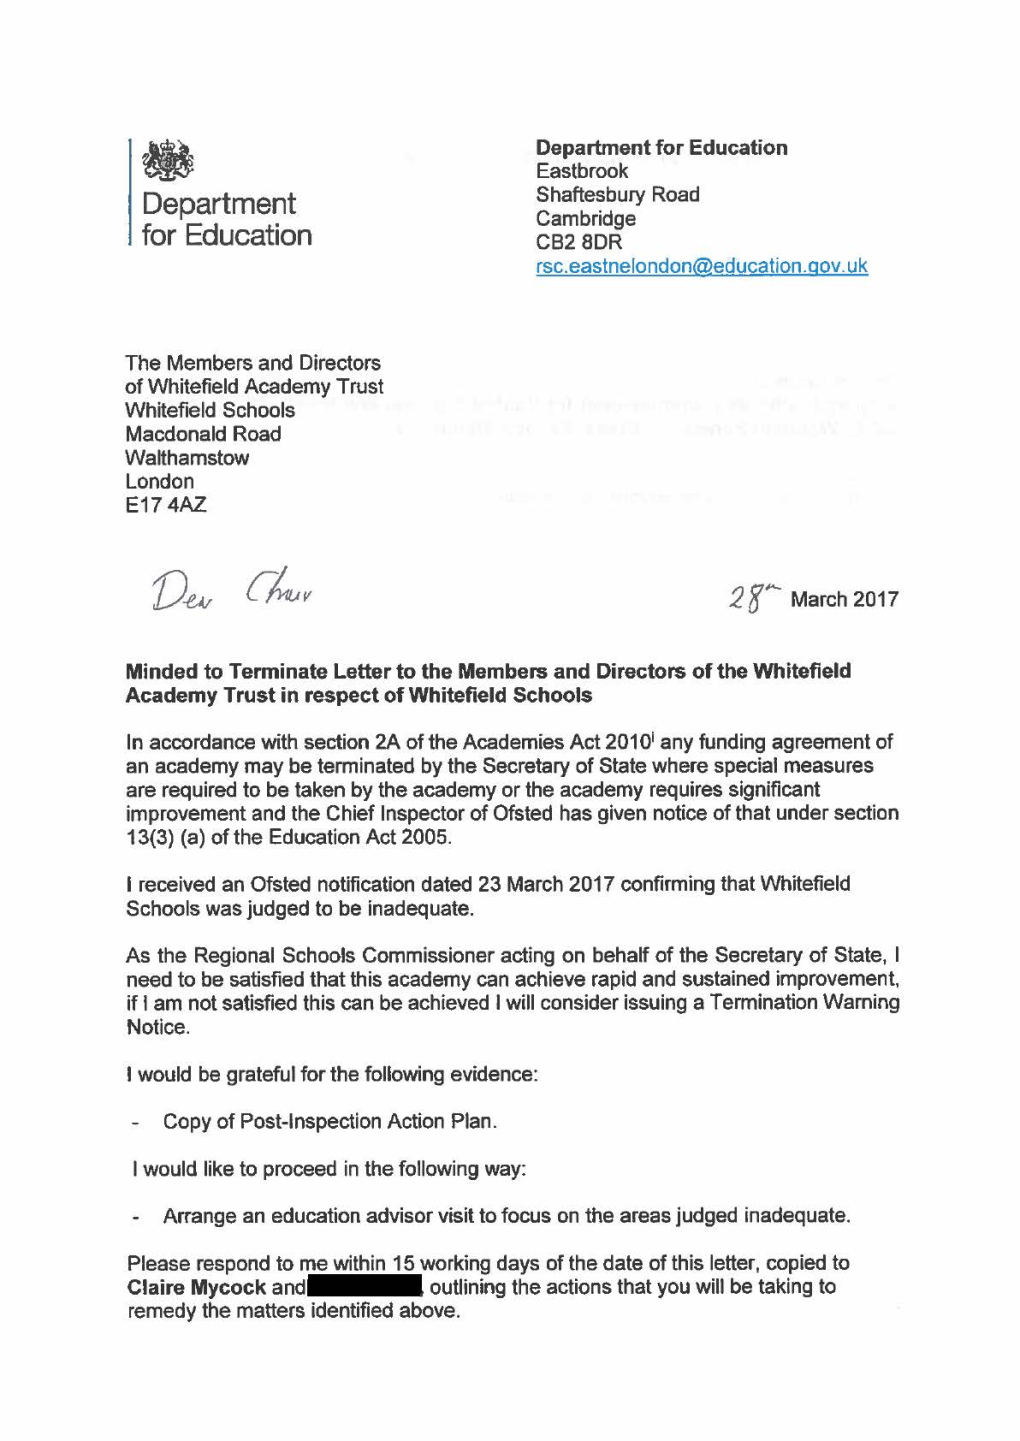 Minded to Terminate Letter to the Members and Directors of the Whitefield Academy Trust in Respect of Whitefield Schools